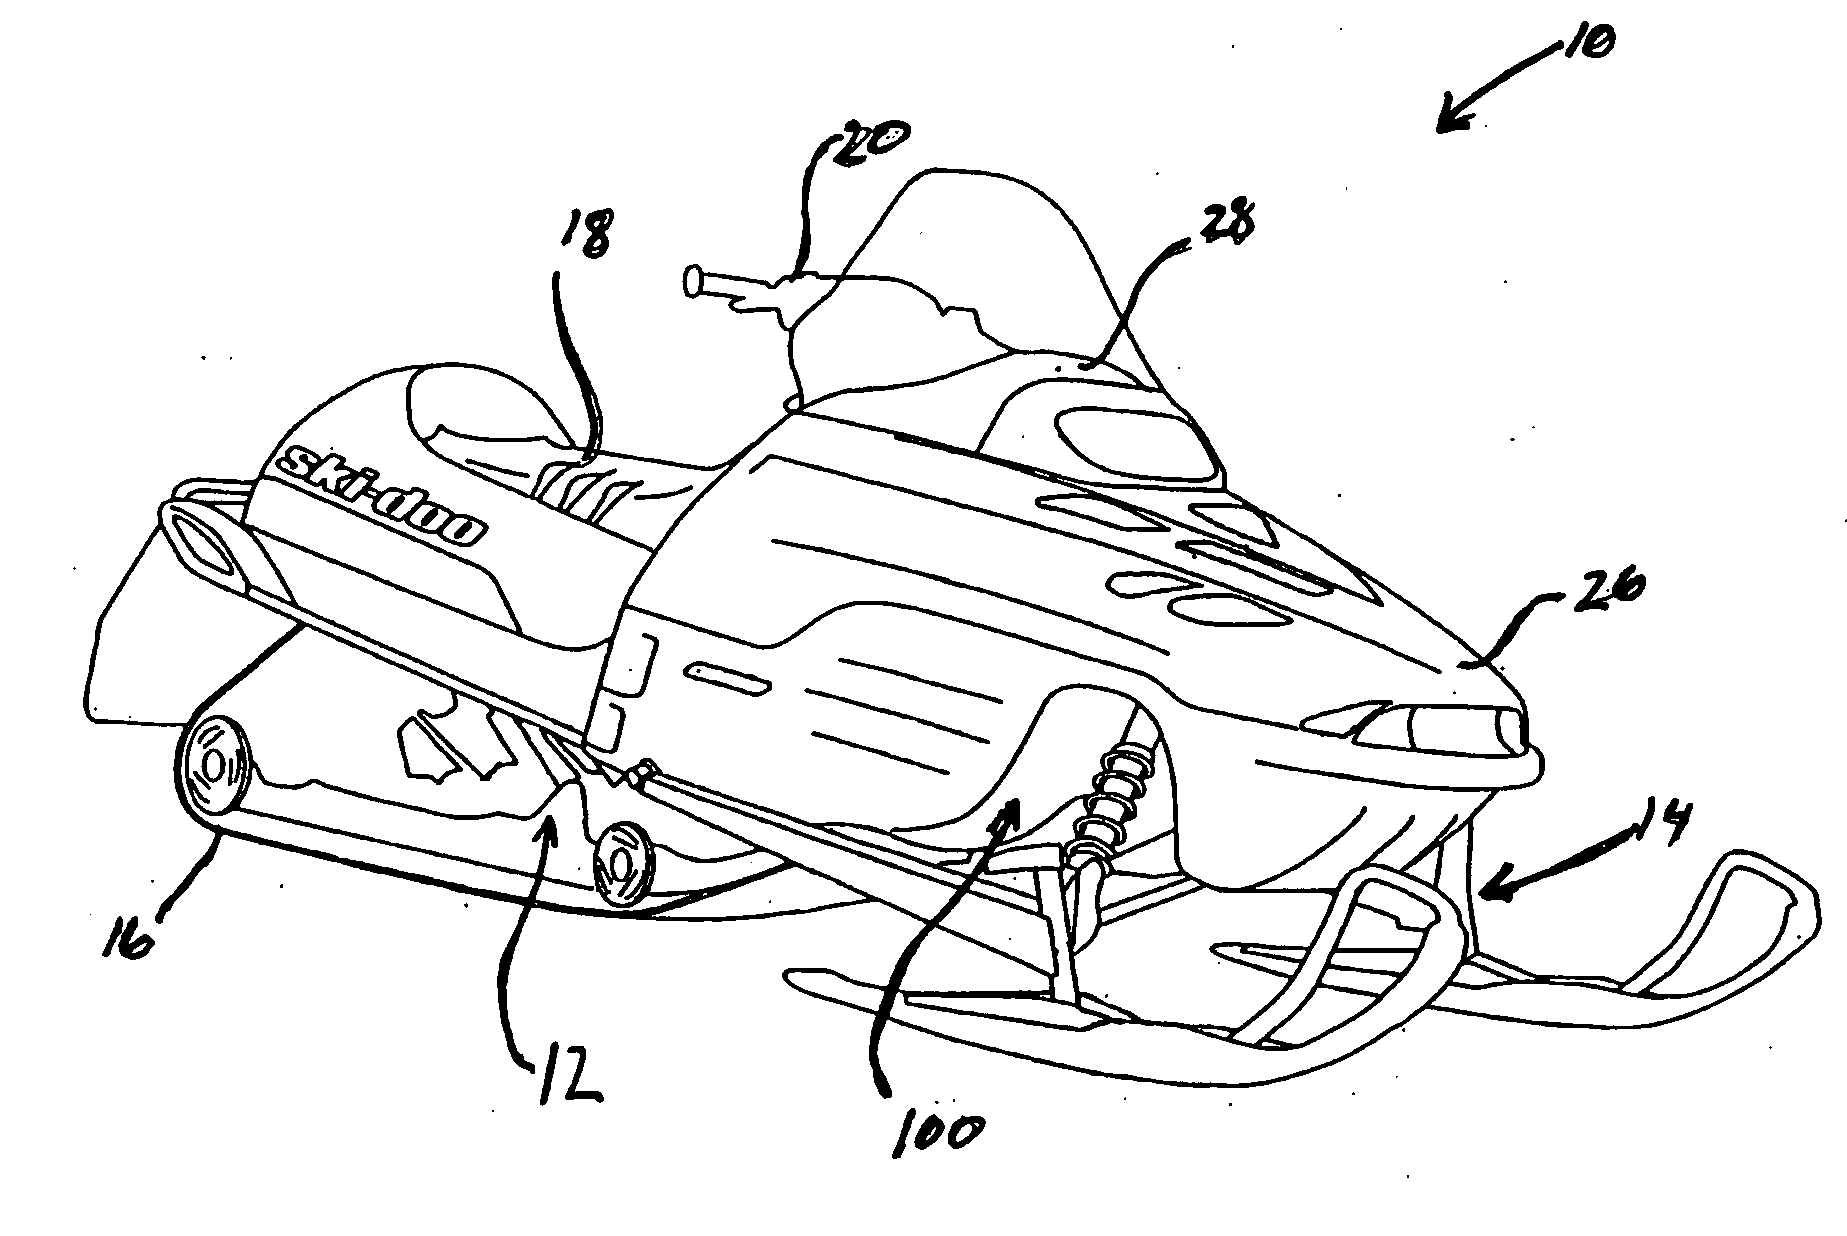 Snowmobile with a turbocharged four-stroke engine